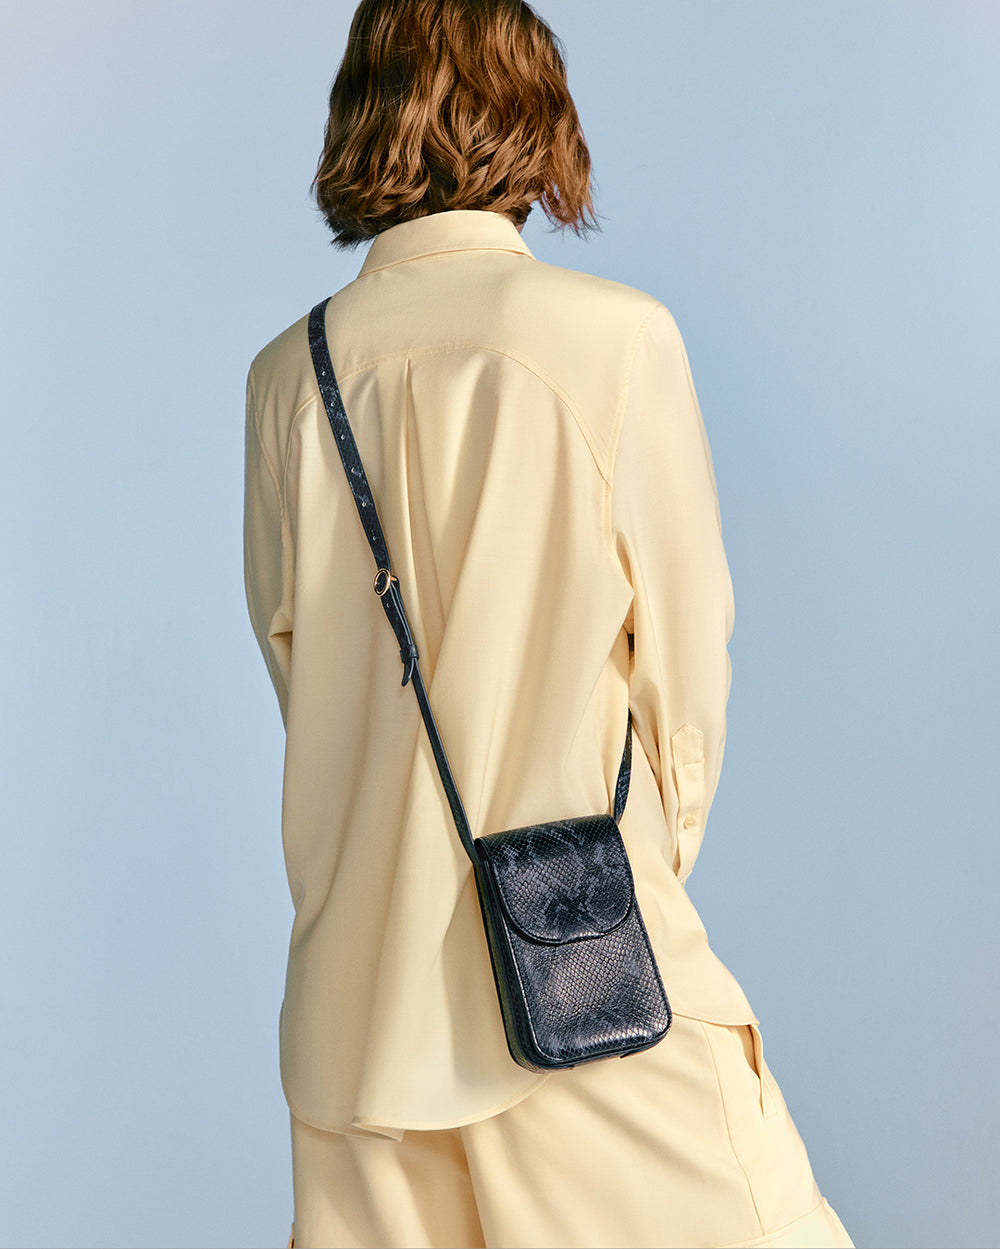 Person wearing an outfit with a shoulder bag, viewed from the back.